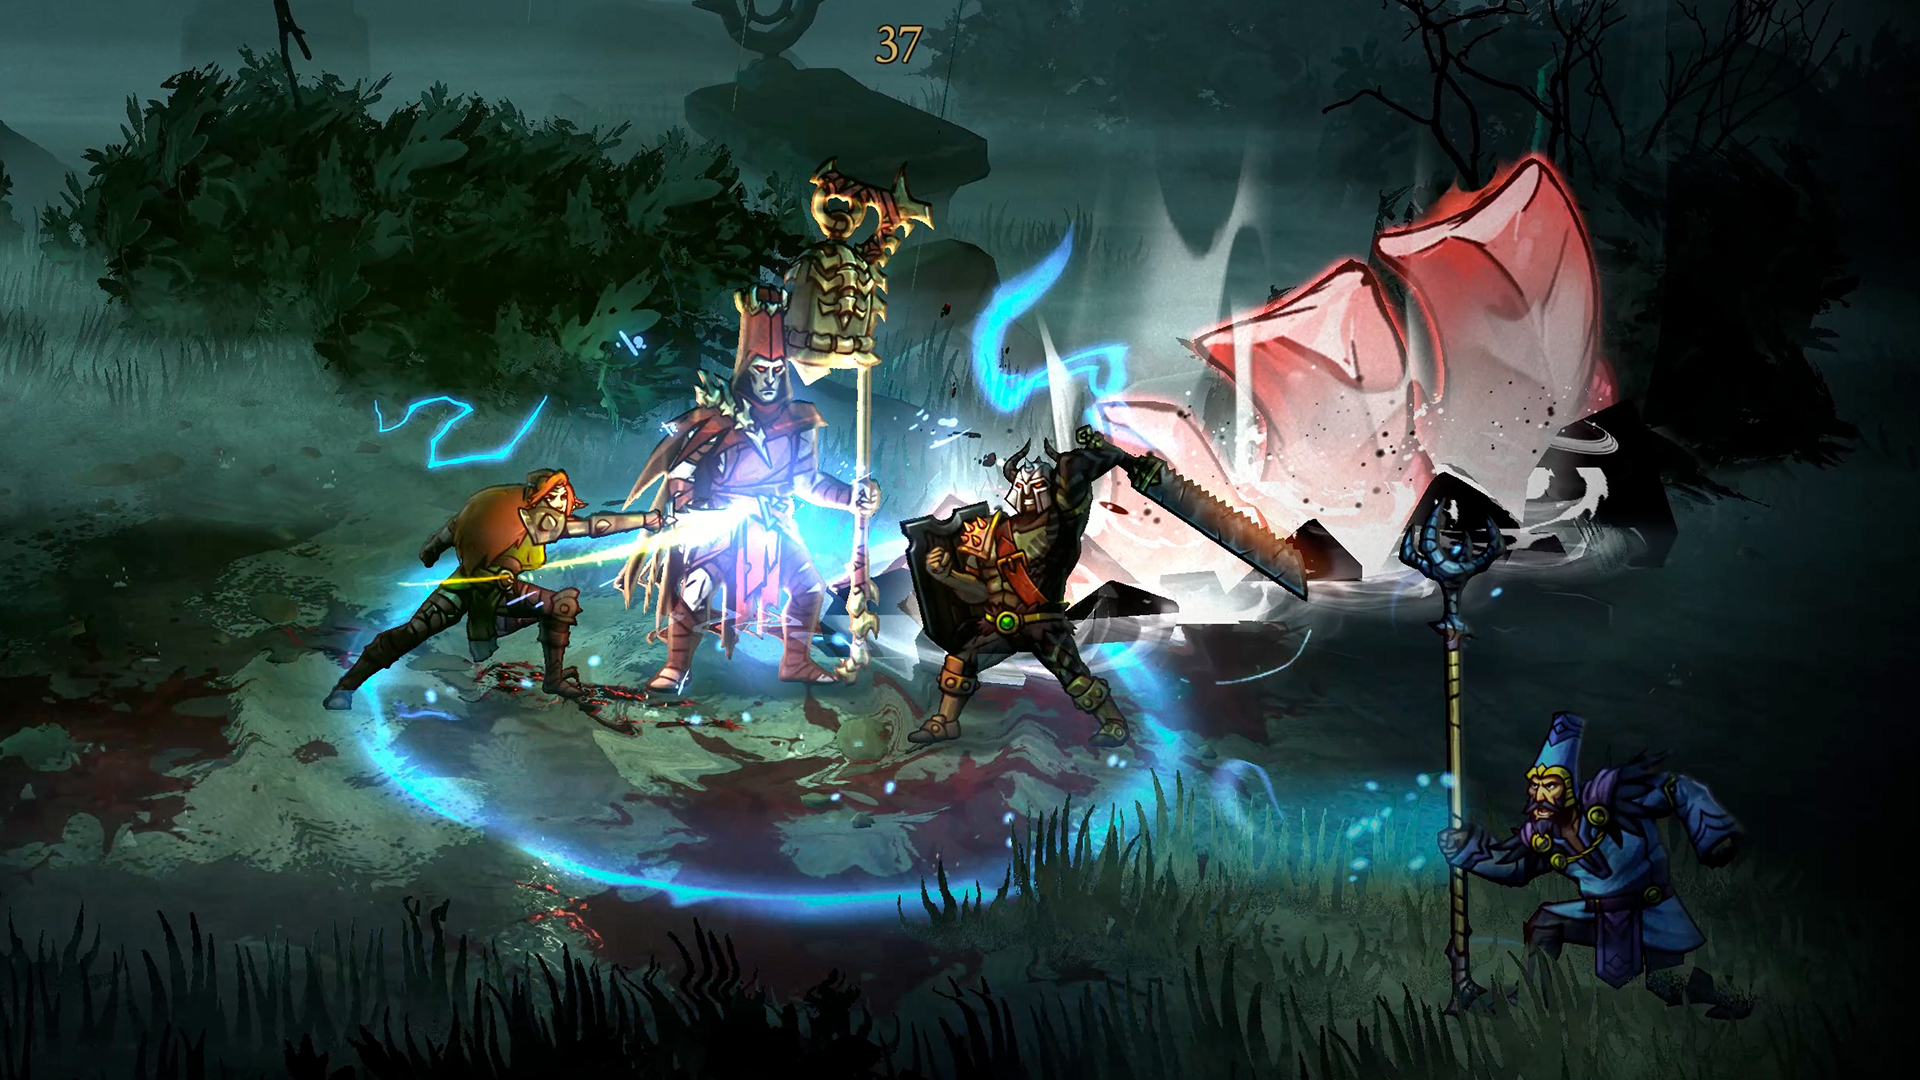  Co-op dungeon crawler Blightbound is having a free open beta test this weekend 